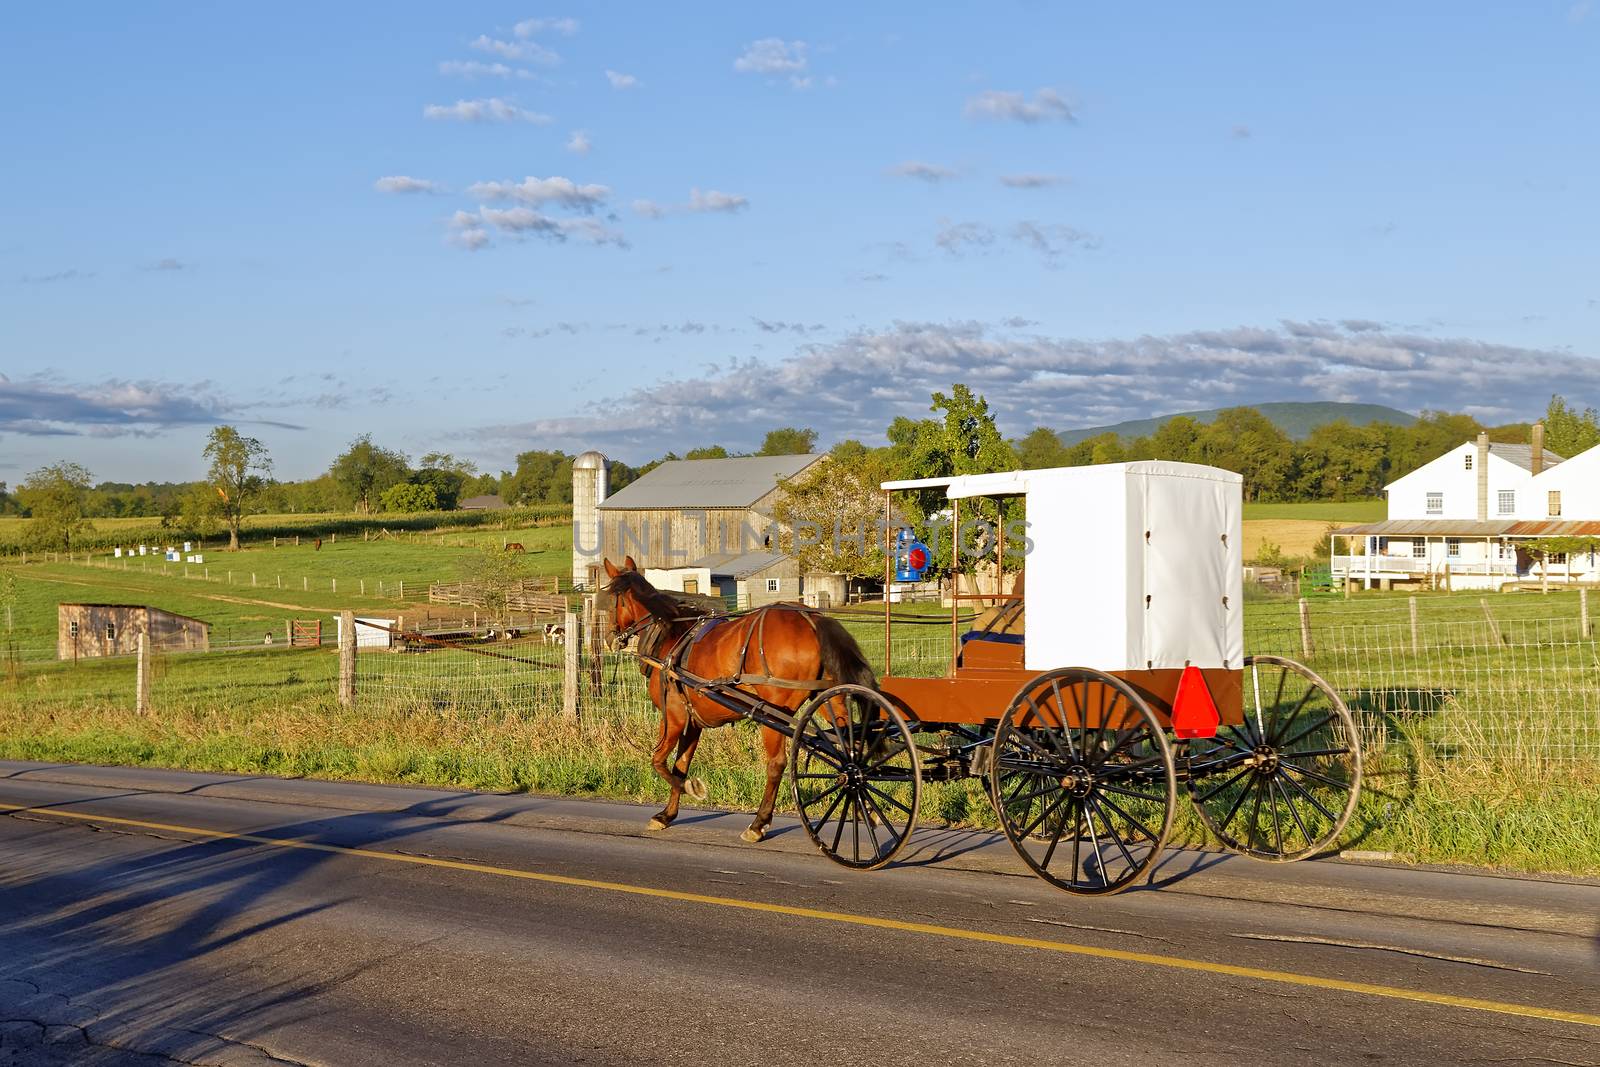 An Amish Horse and Carriage Travels on a Rural Road  by DelmasLehman